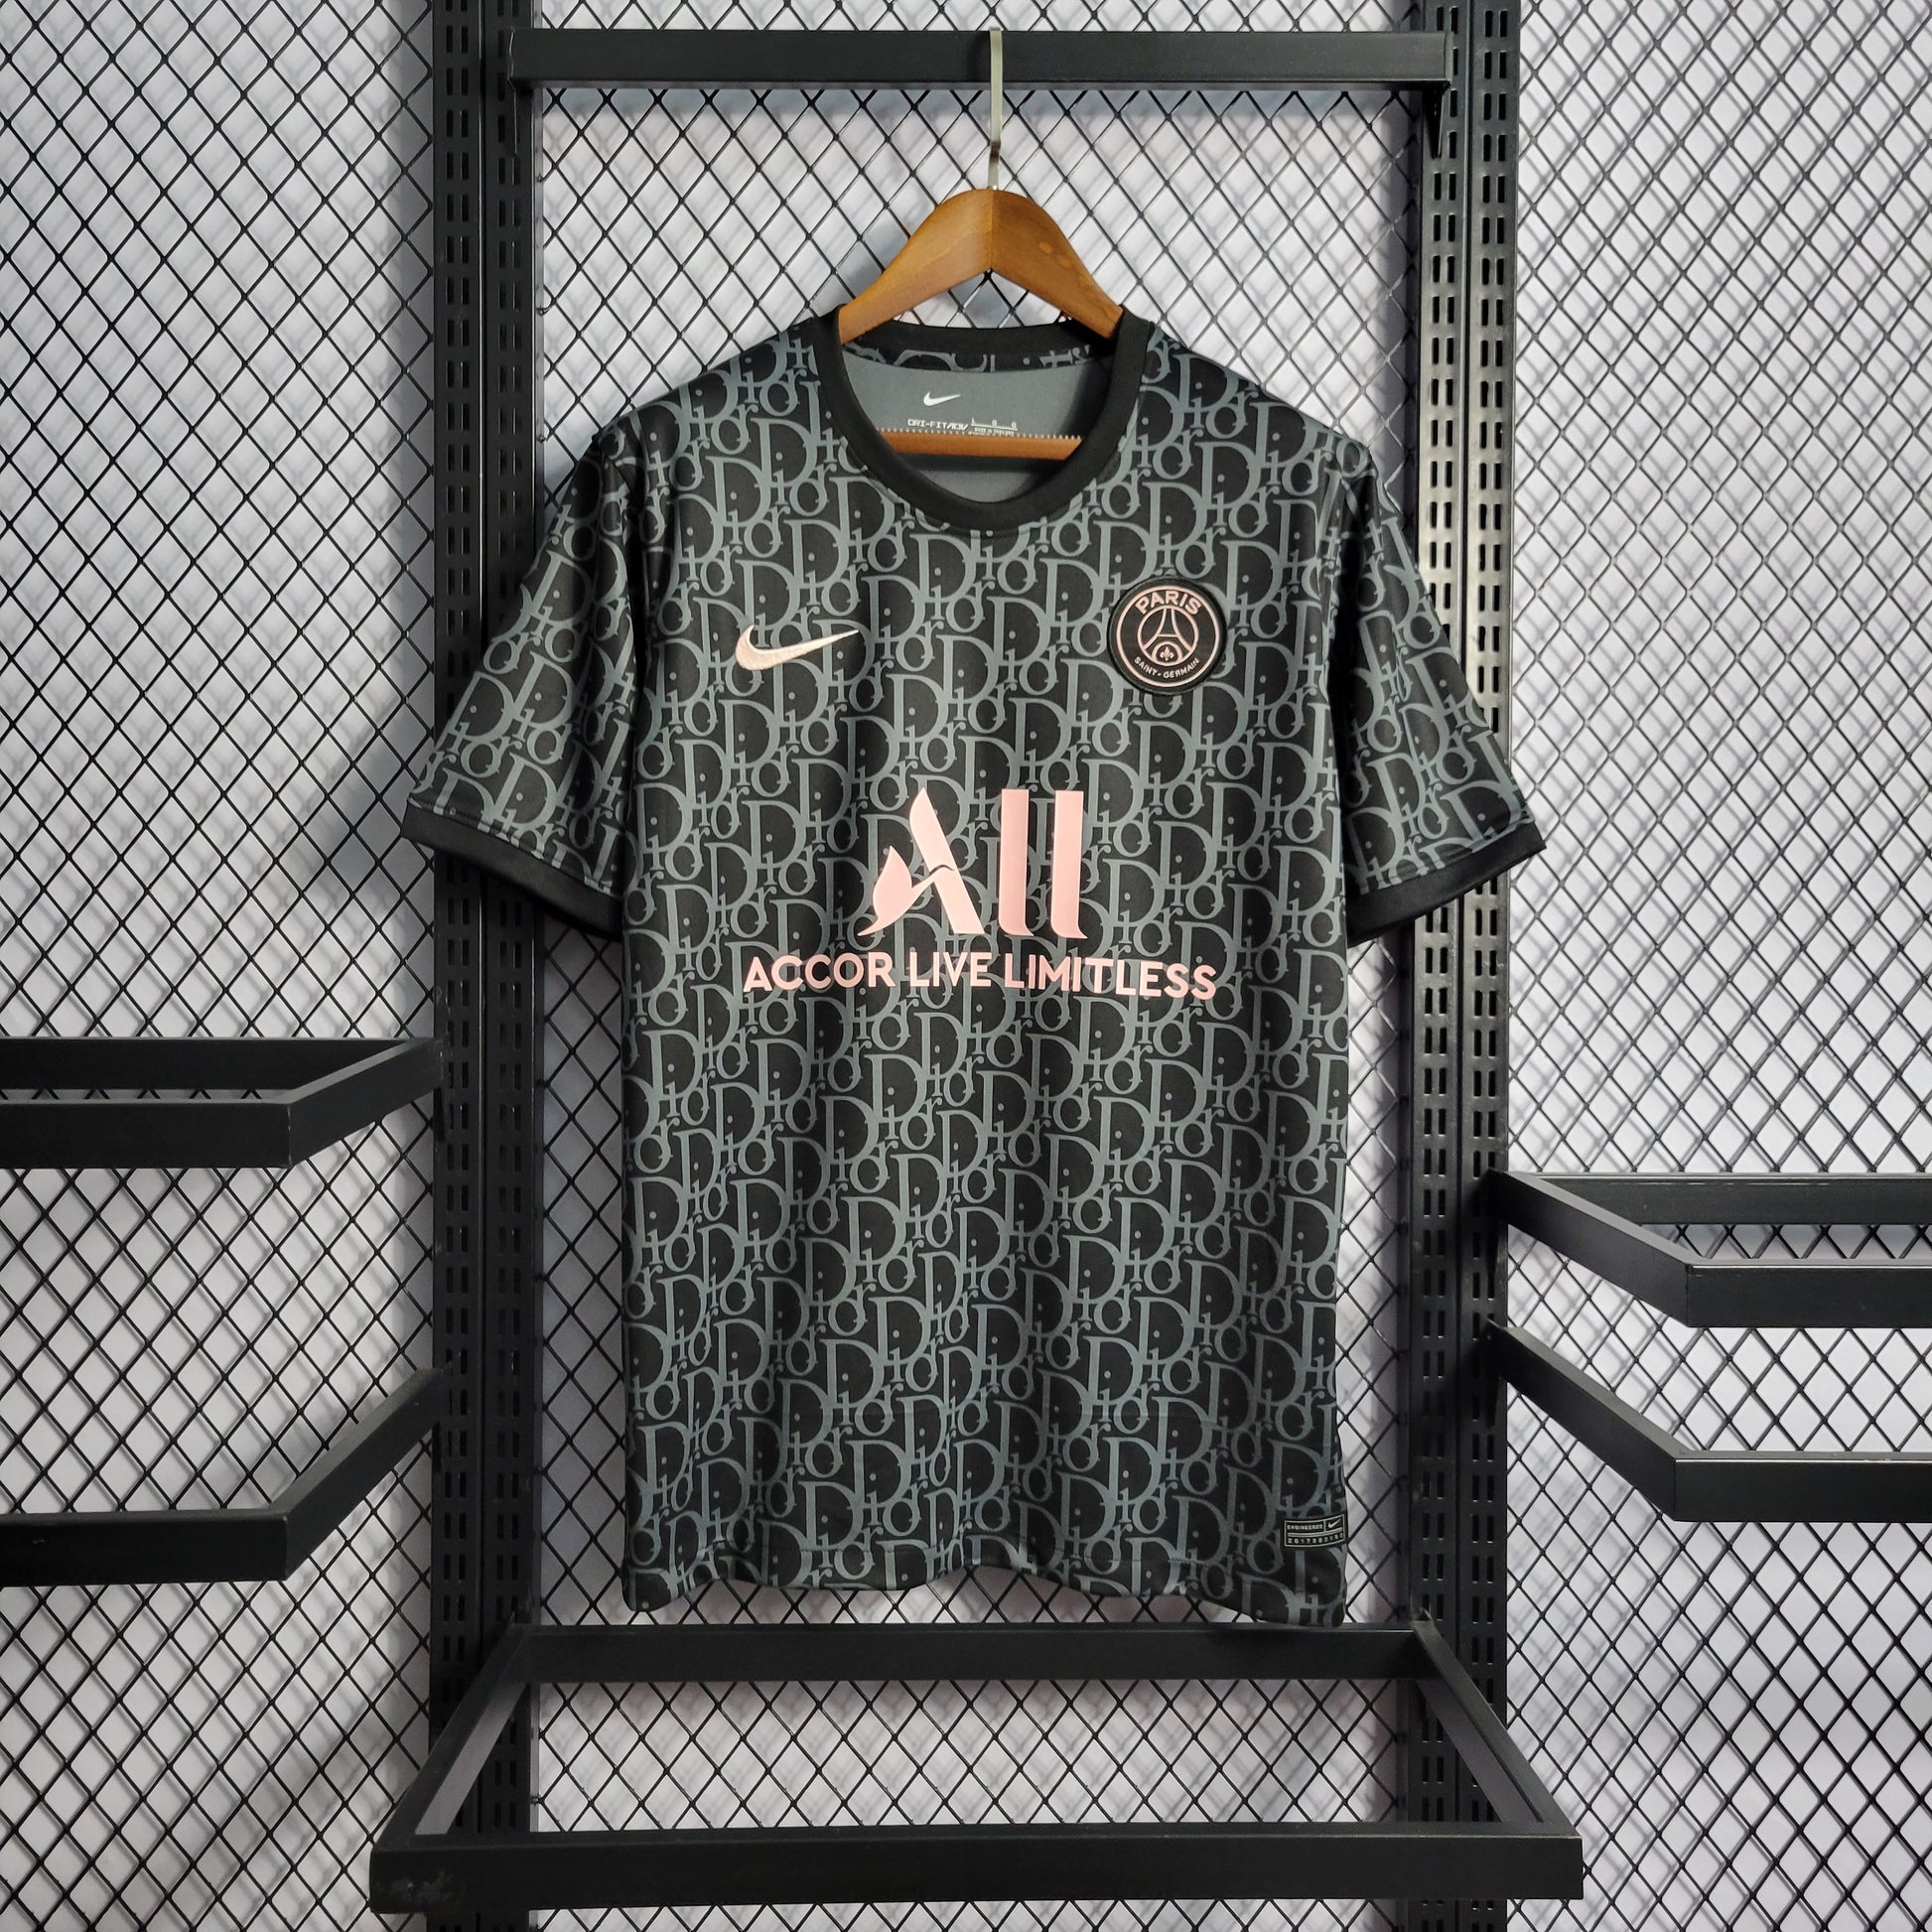 Football Nike PSG x Dior Jersey Shirt 🔥 Last one available ✓